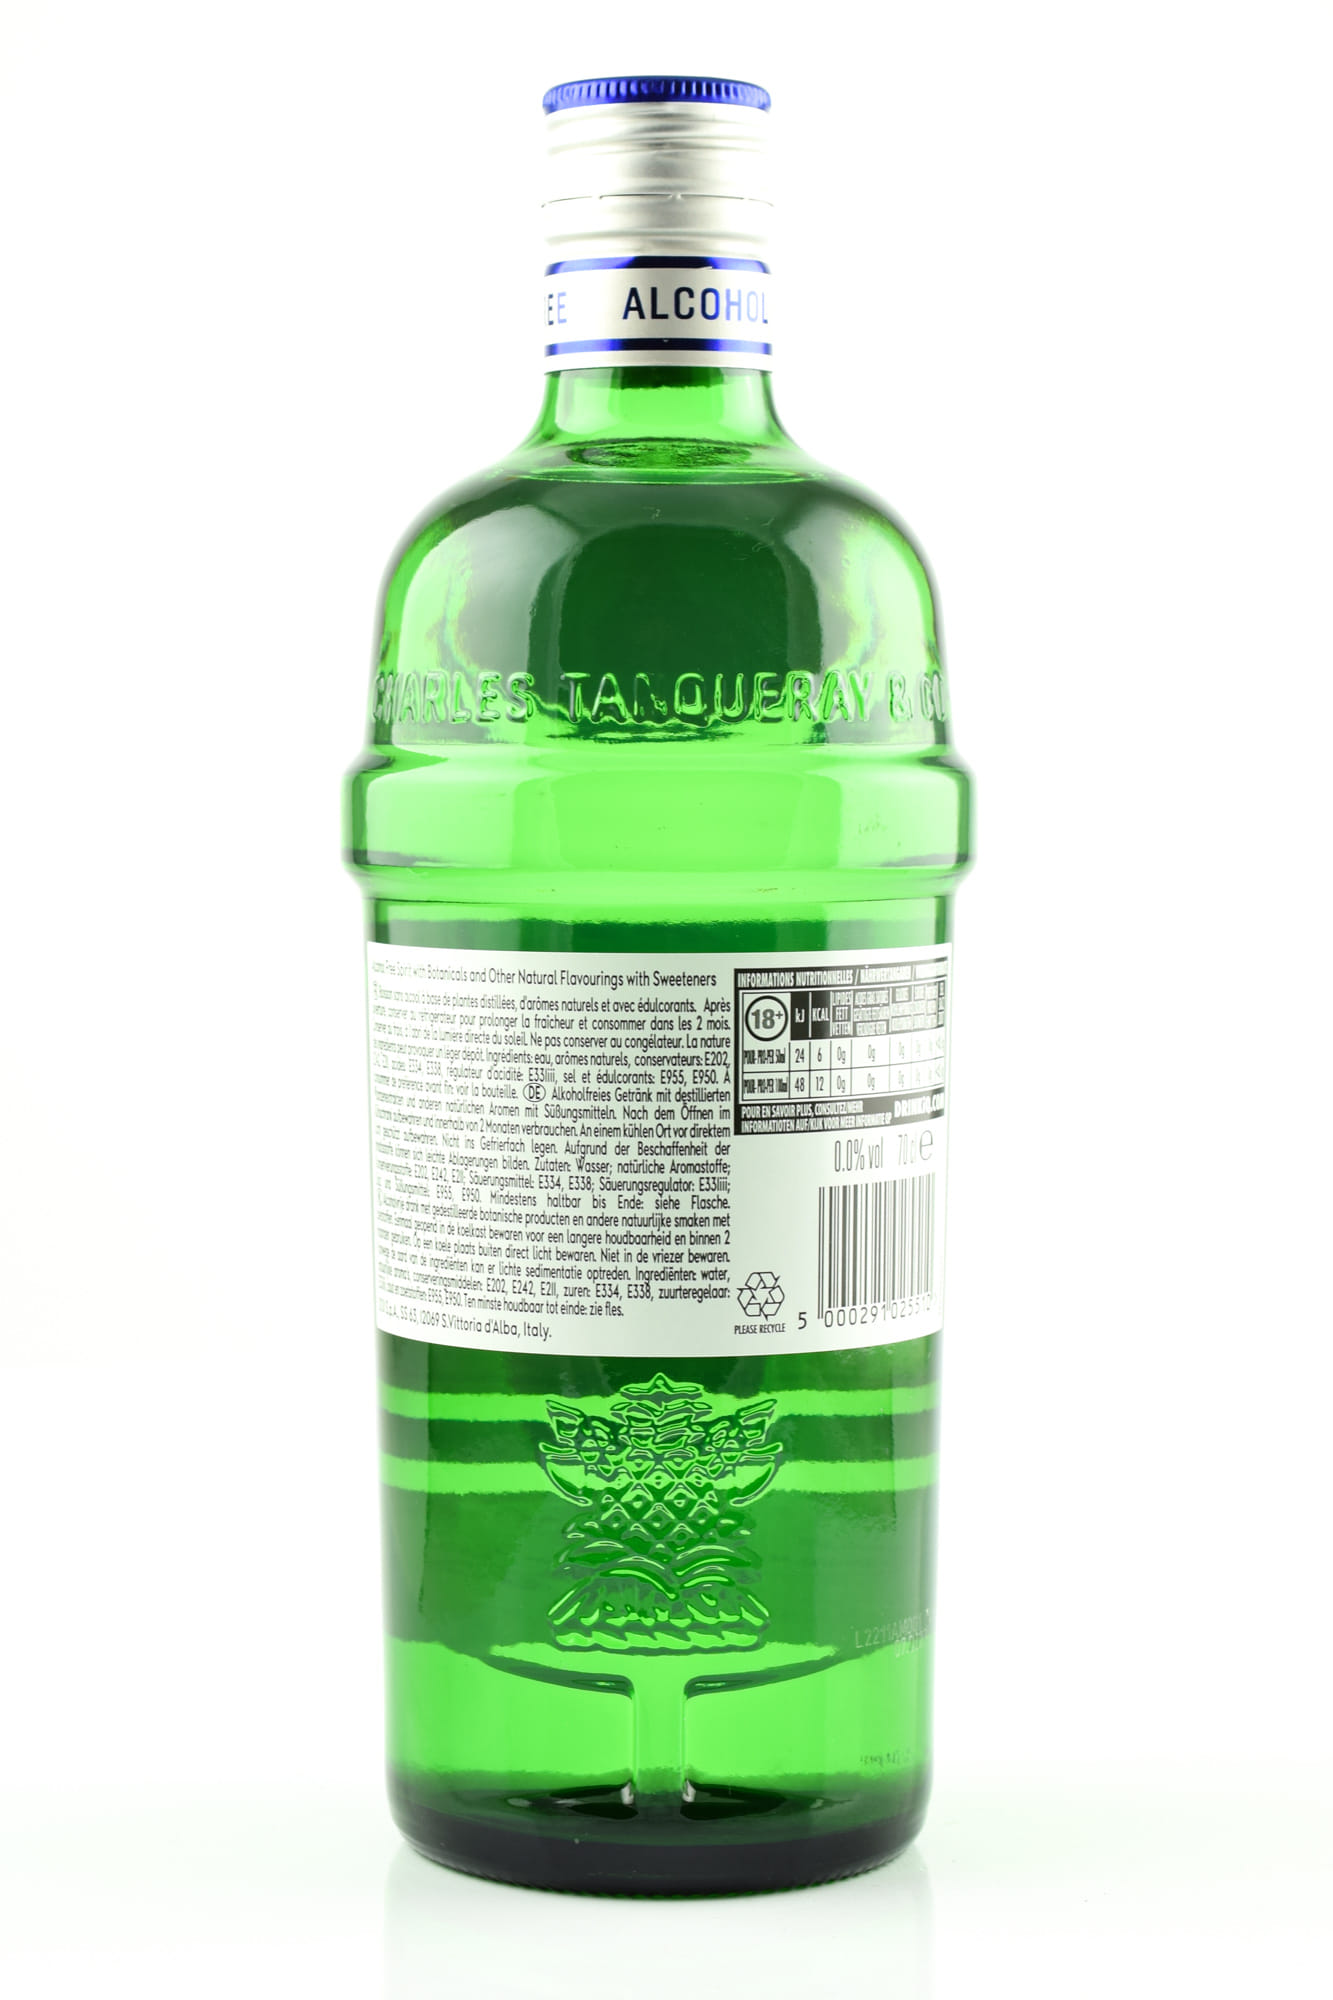 | >> free 0,0 alcohol Malts Tanqueray of Malts of Home at Home explore now!